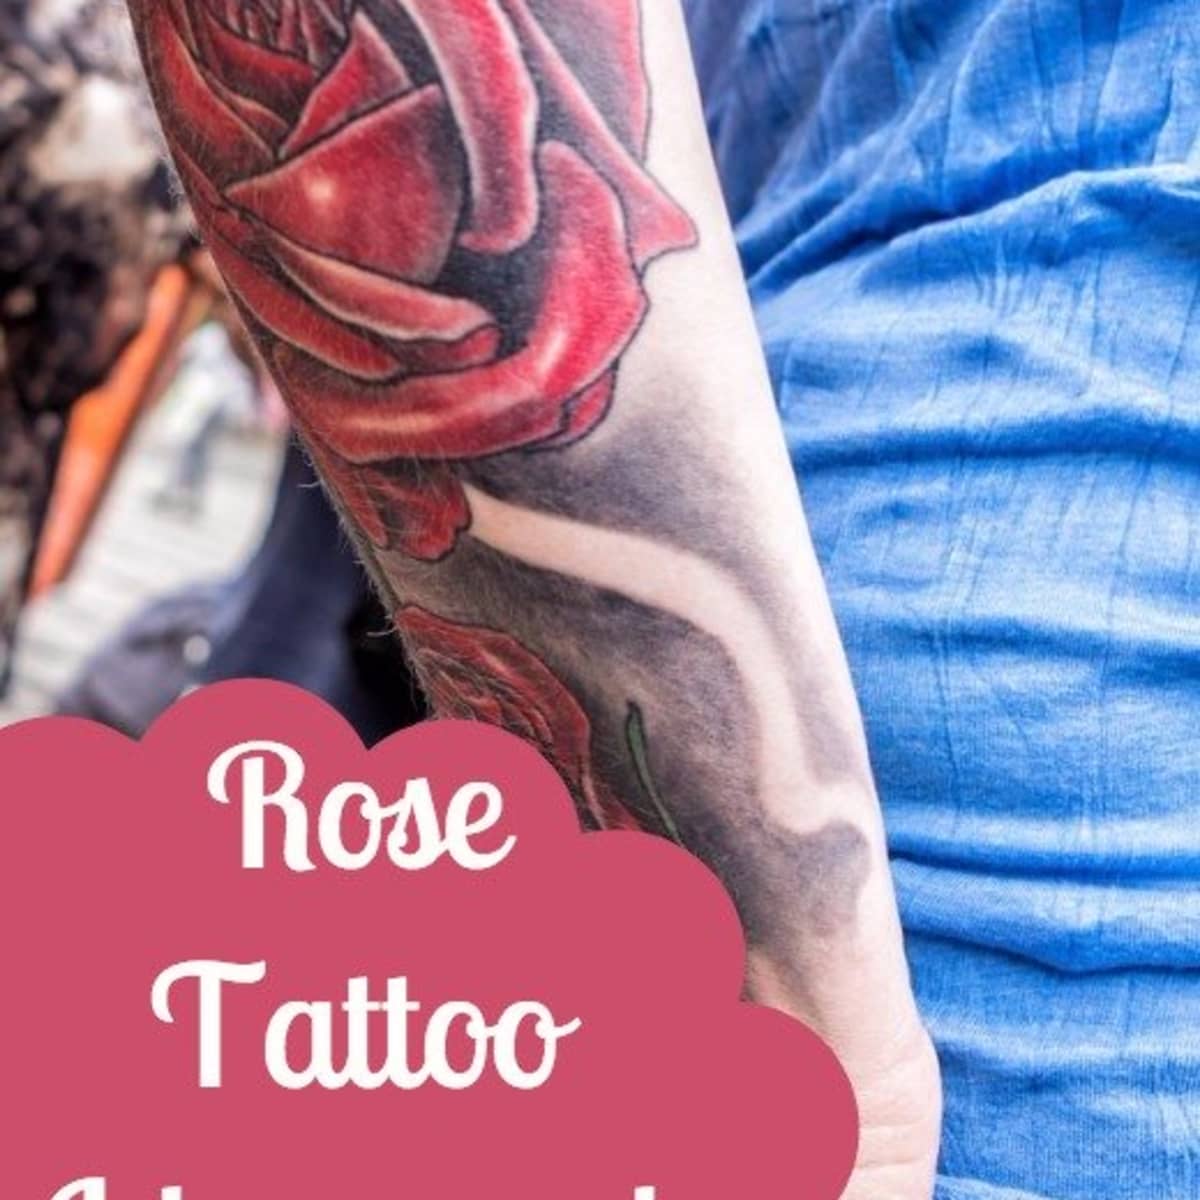 Rose Tattoo History, Ideas, and Meanings - TatRing